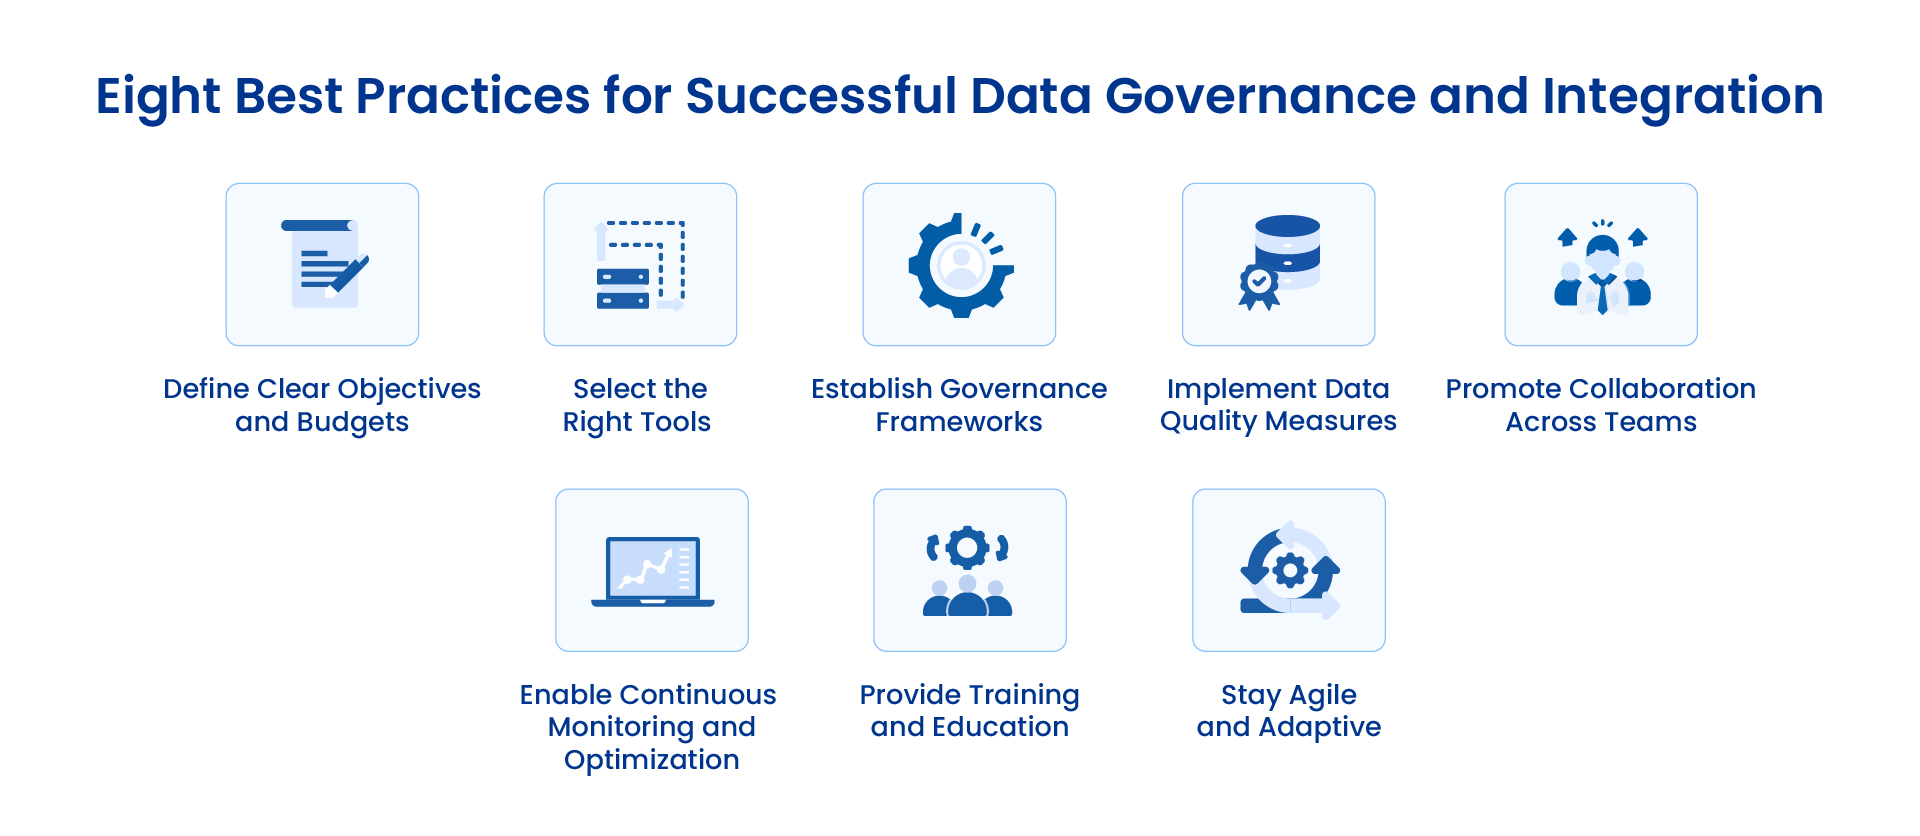 Eight Best Practices for Successful Data Governance and Integration